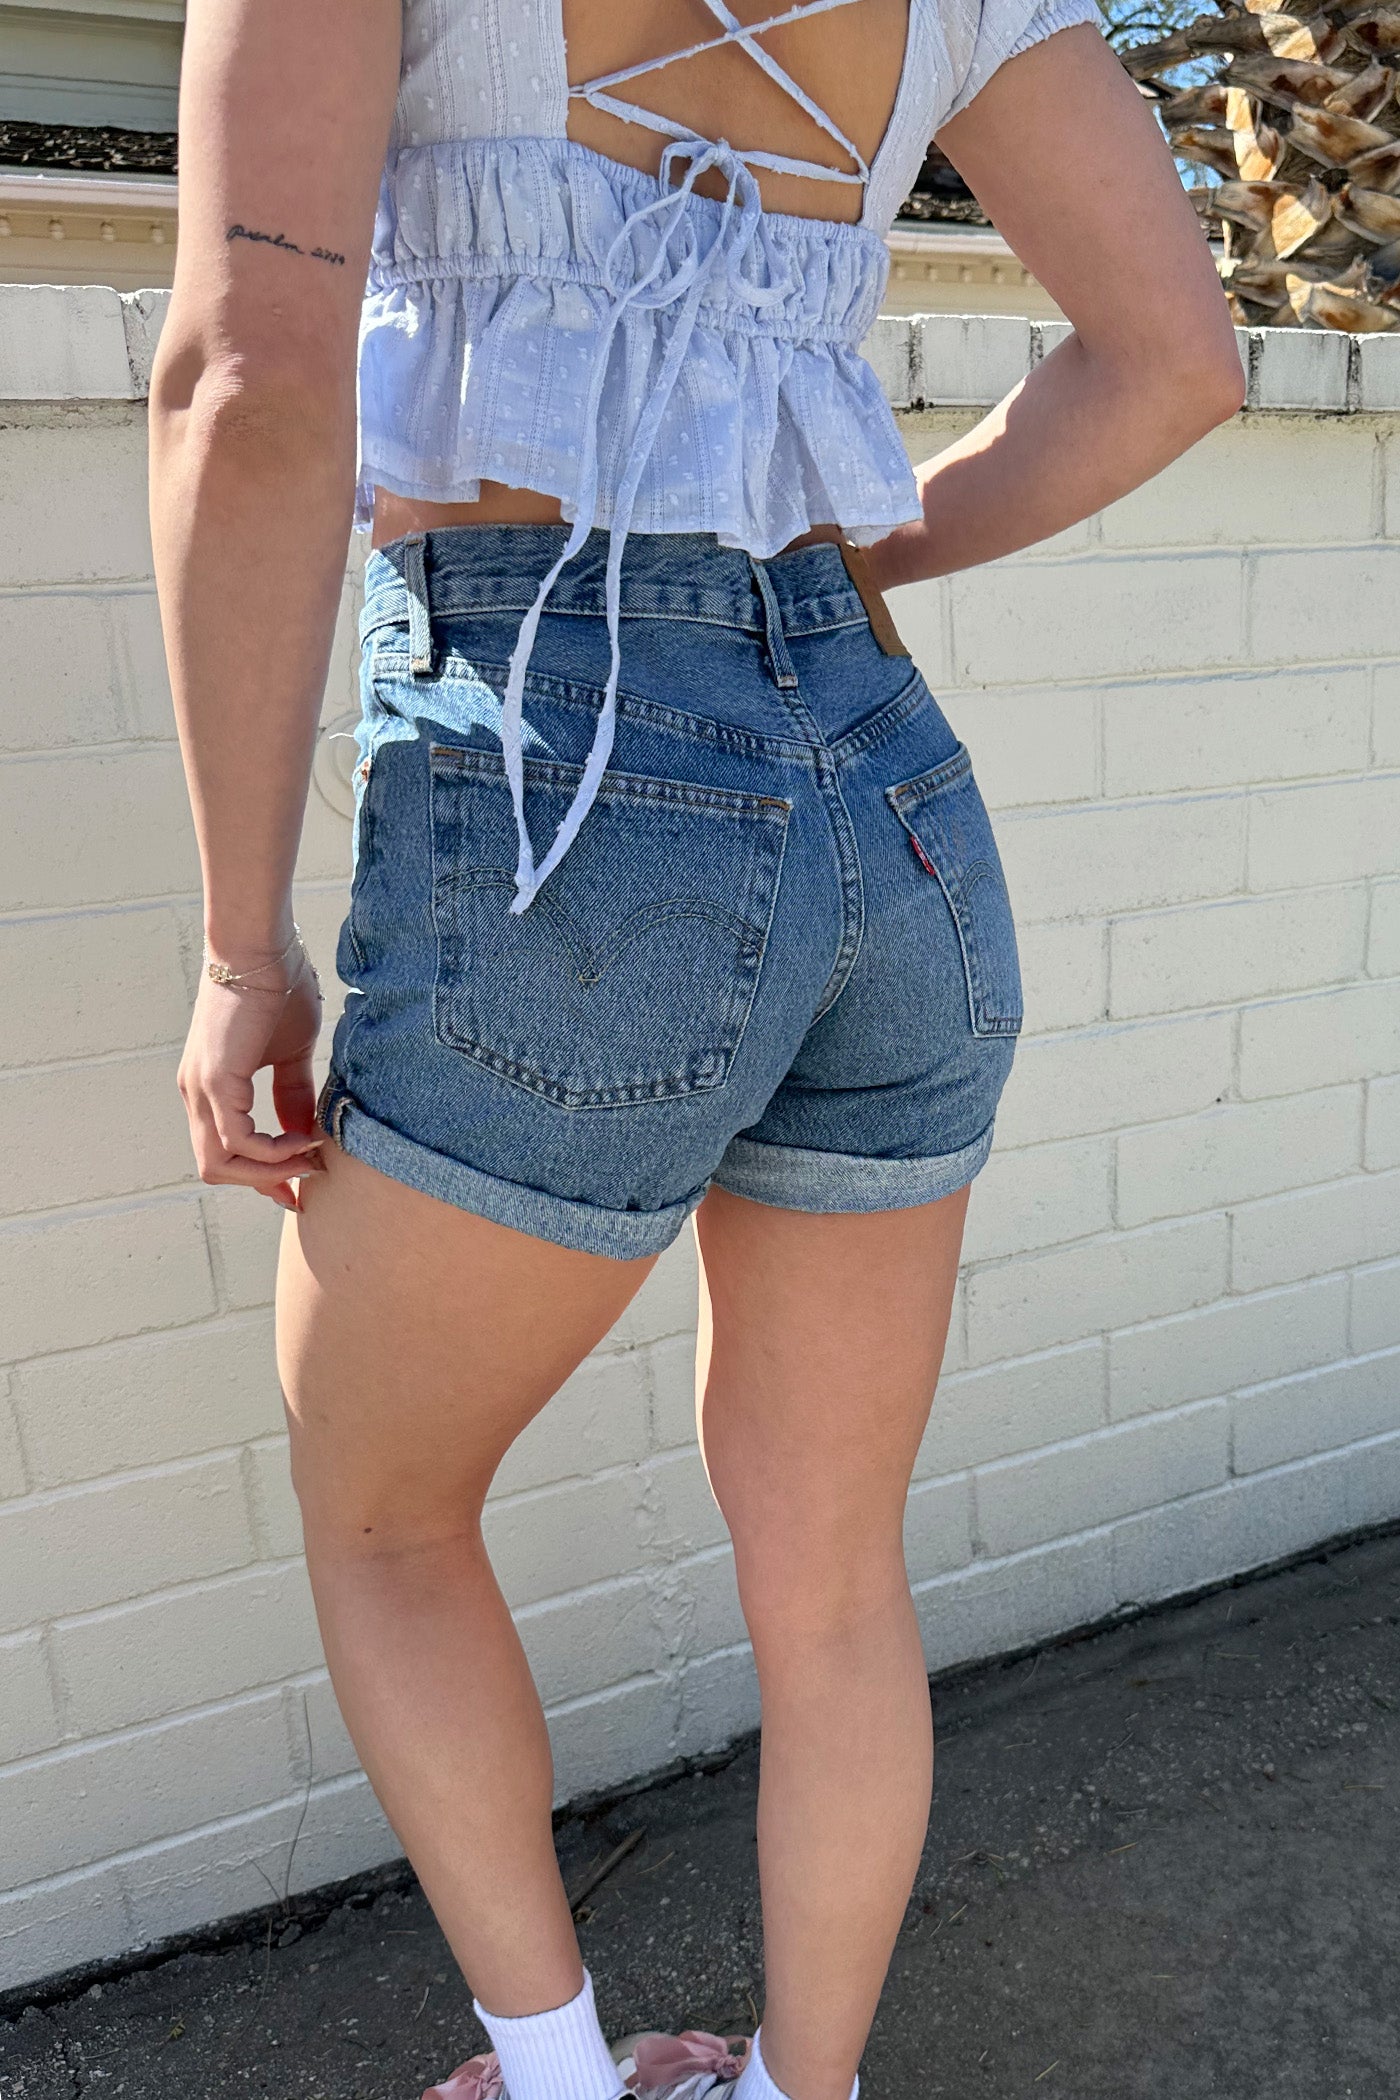 501 Rolled Denim Shorts by Levi's